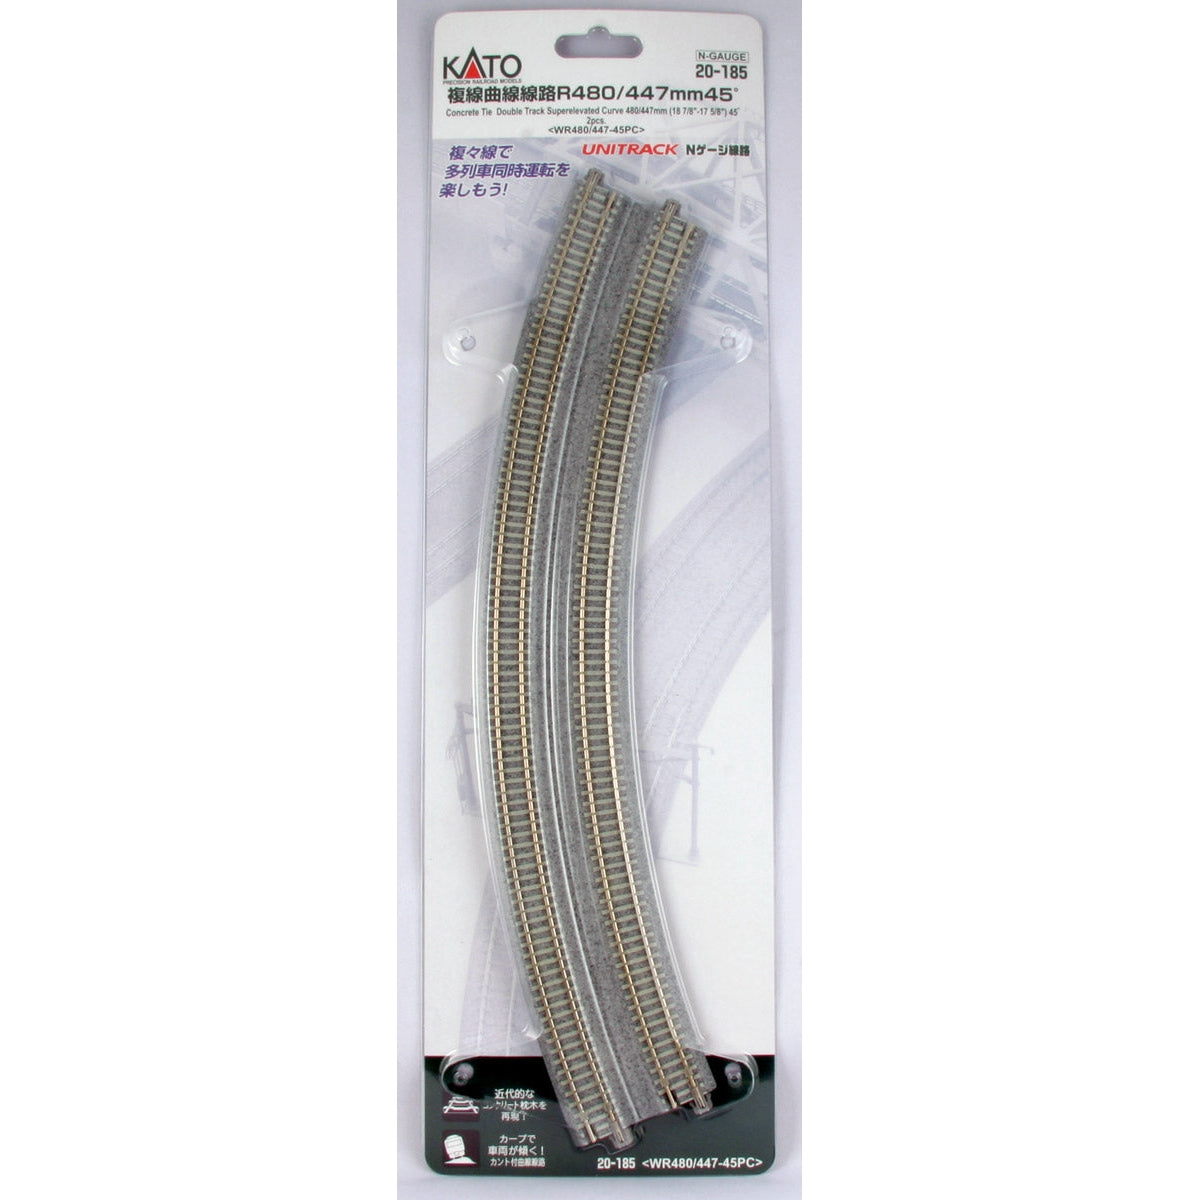 Kato 20-185  480mm/447mm Radius 45 (18 7/8" - 17 5/8") CT Double Track Superelevated Curve Track [2 pcs]  N Scale